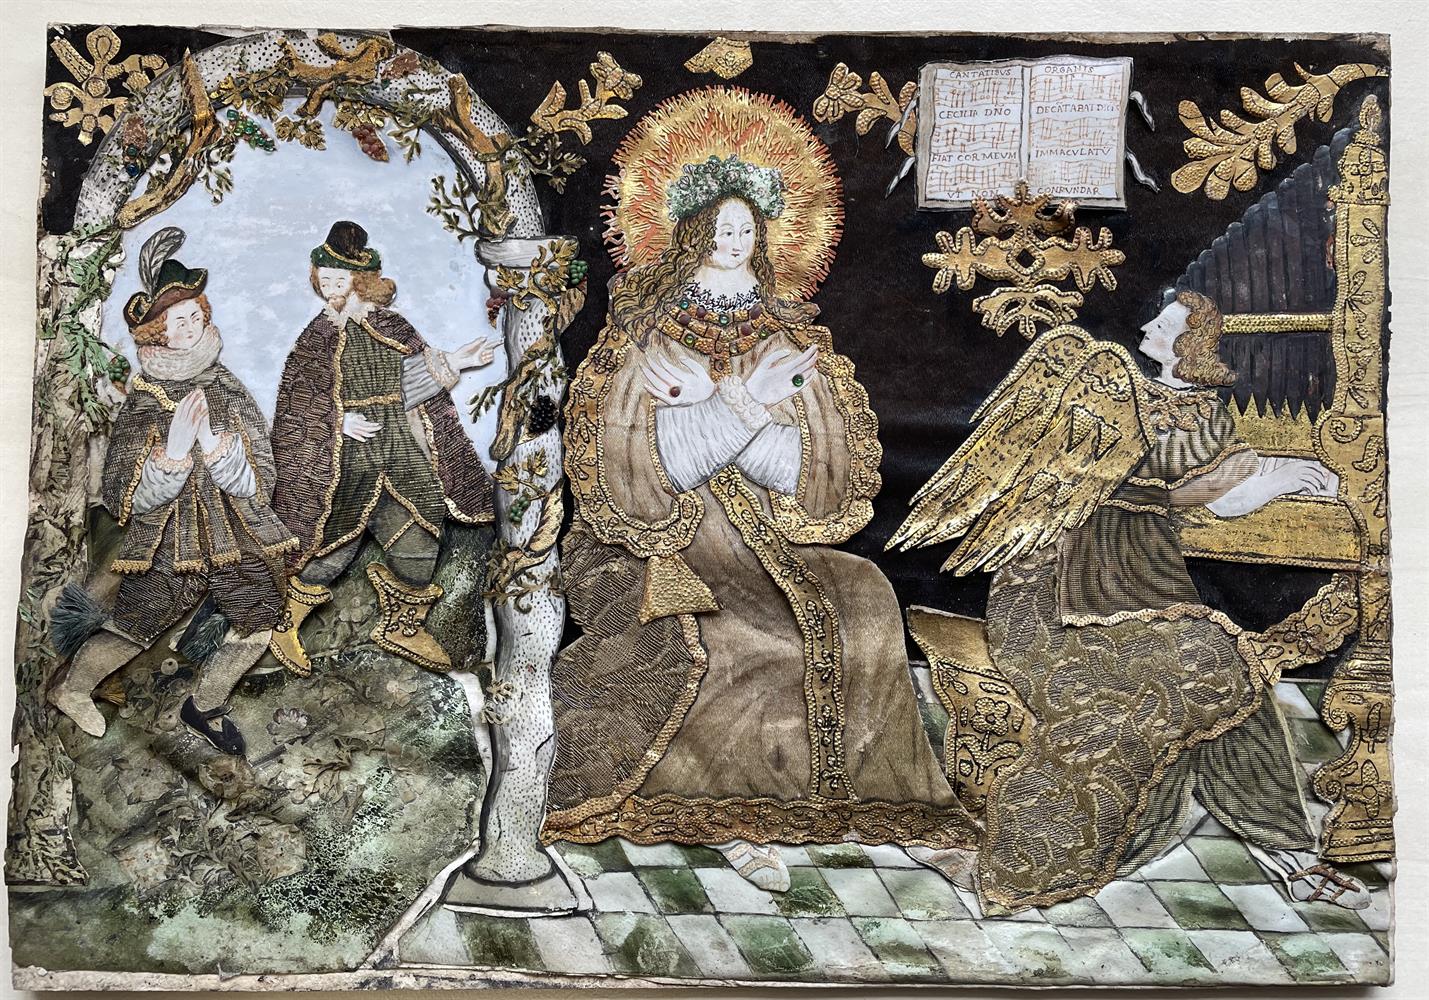 A RARE TEXTILE AND NEEDLEWORK COLLAGE PICTURE DEPICTING SAINT CECILIA, LATE 16TH/EARLY 17TH CENTURY - Image 15 of 18